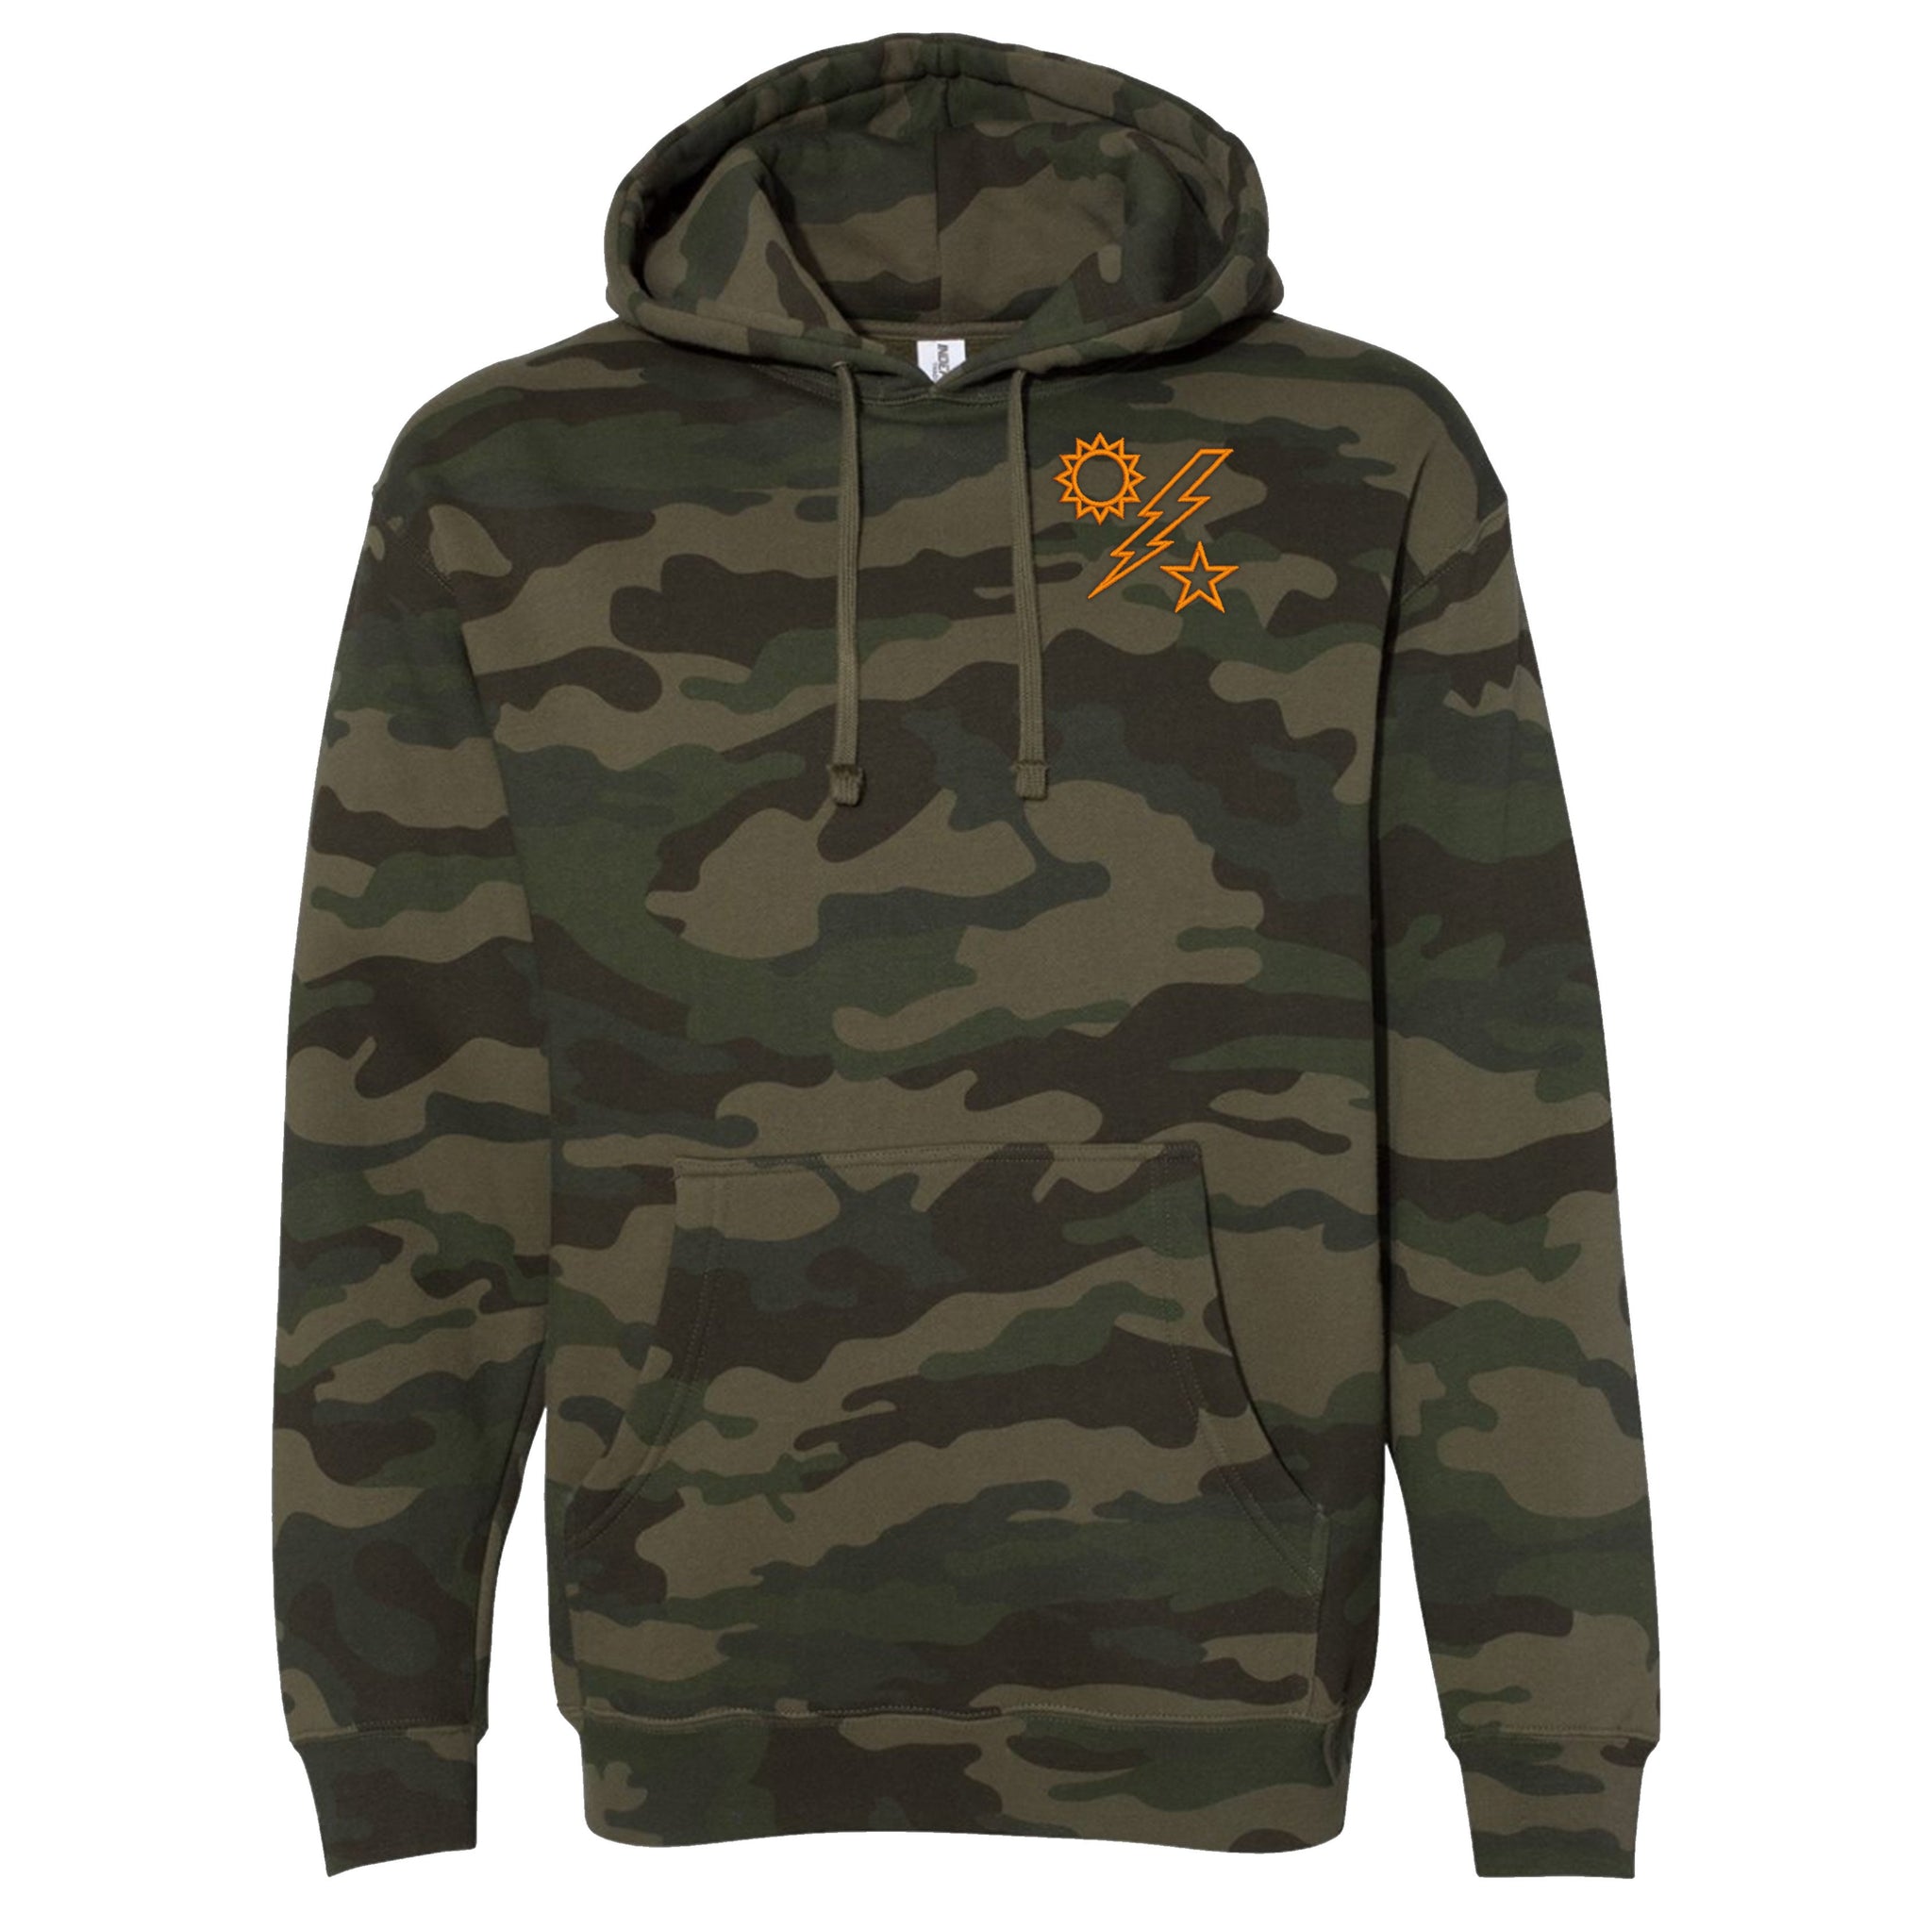 75th DUI Embroidered Hoodie